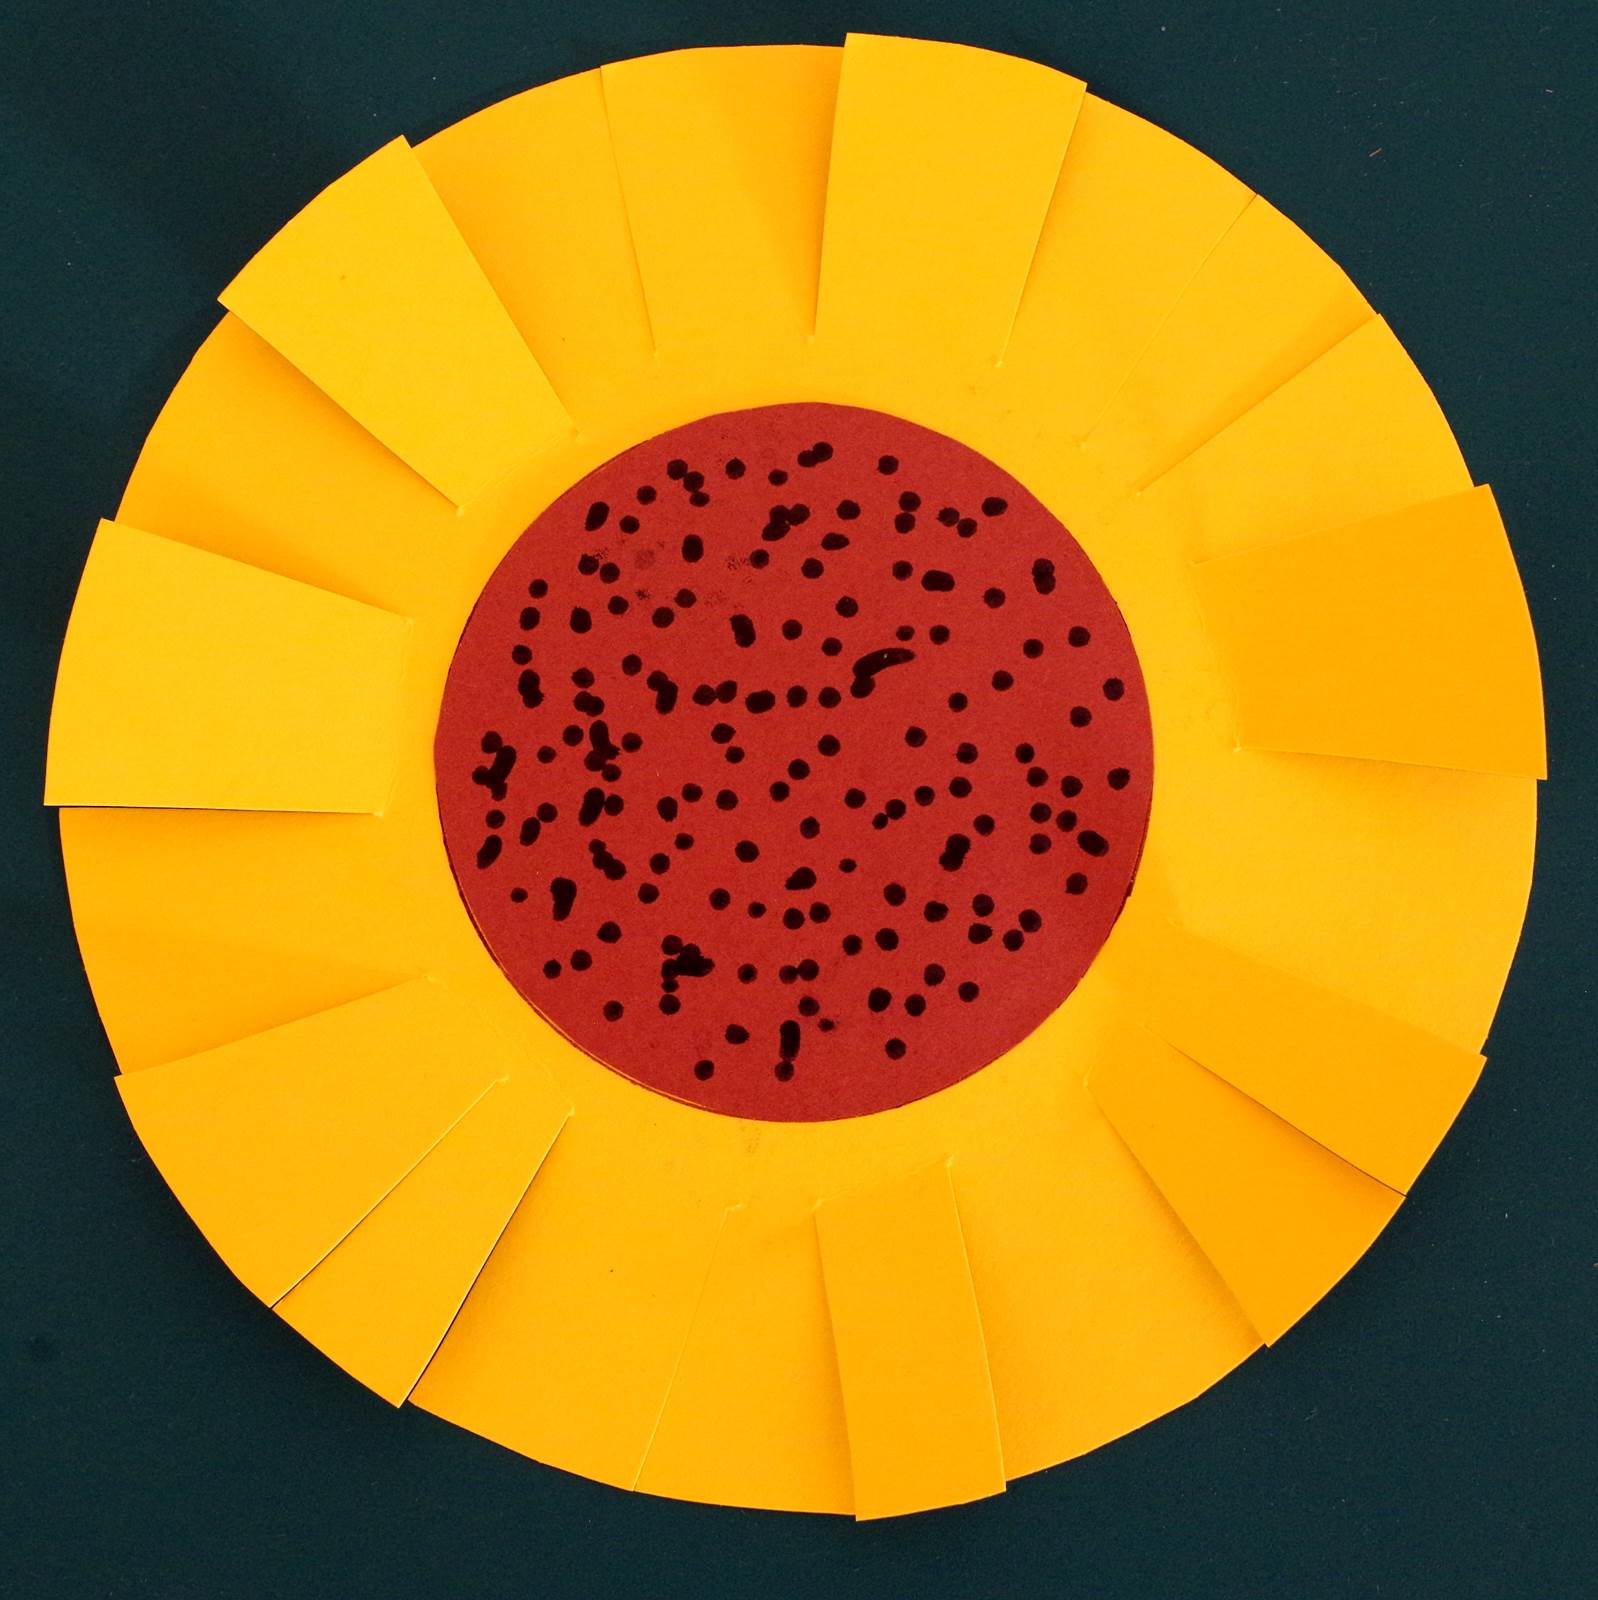 A sunflower cutting craft suitable for toddlers with an interest in using scissors.